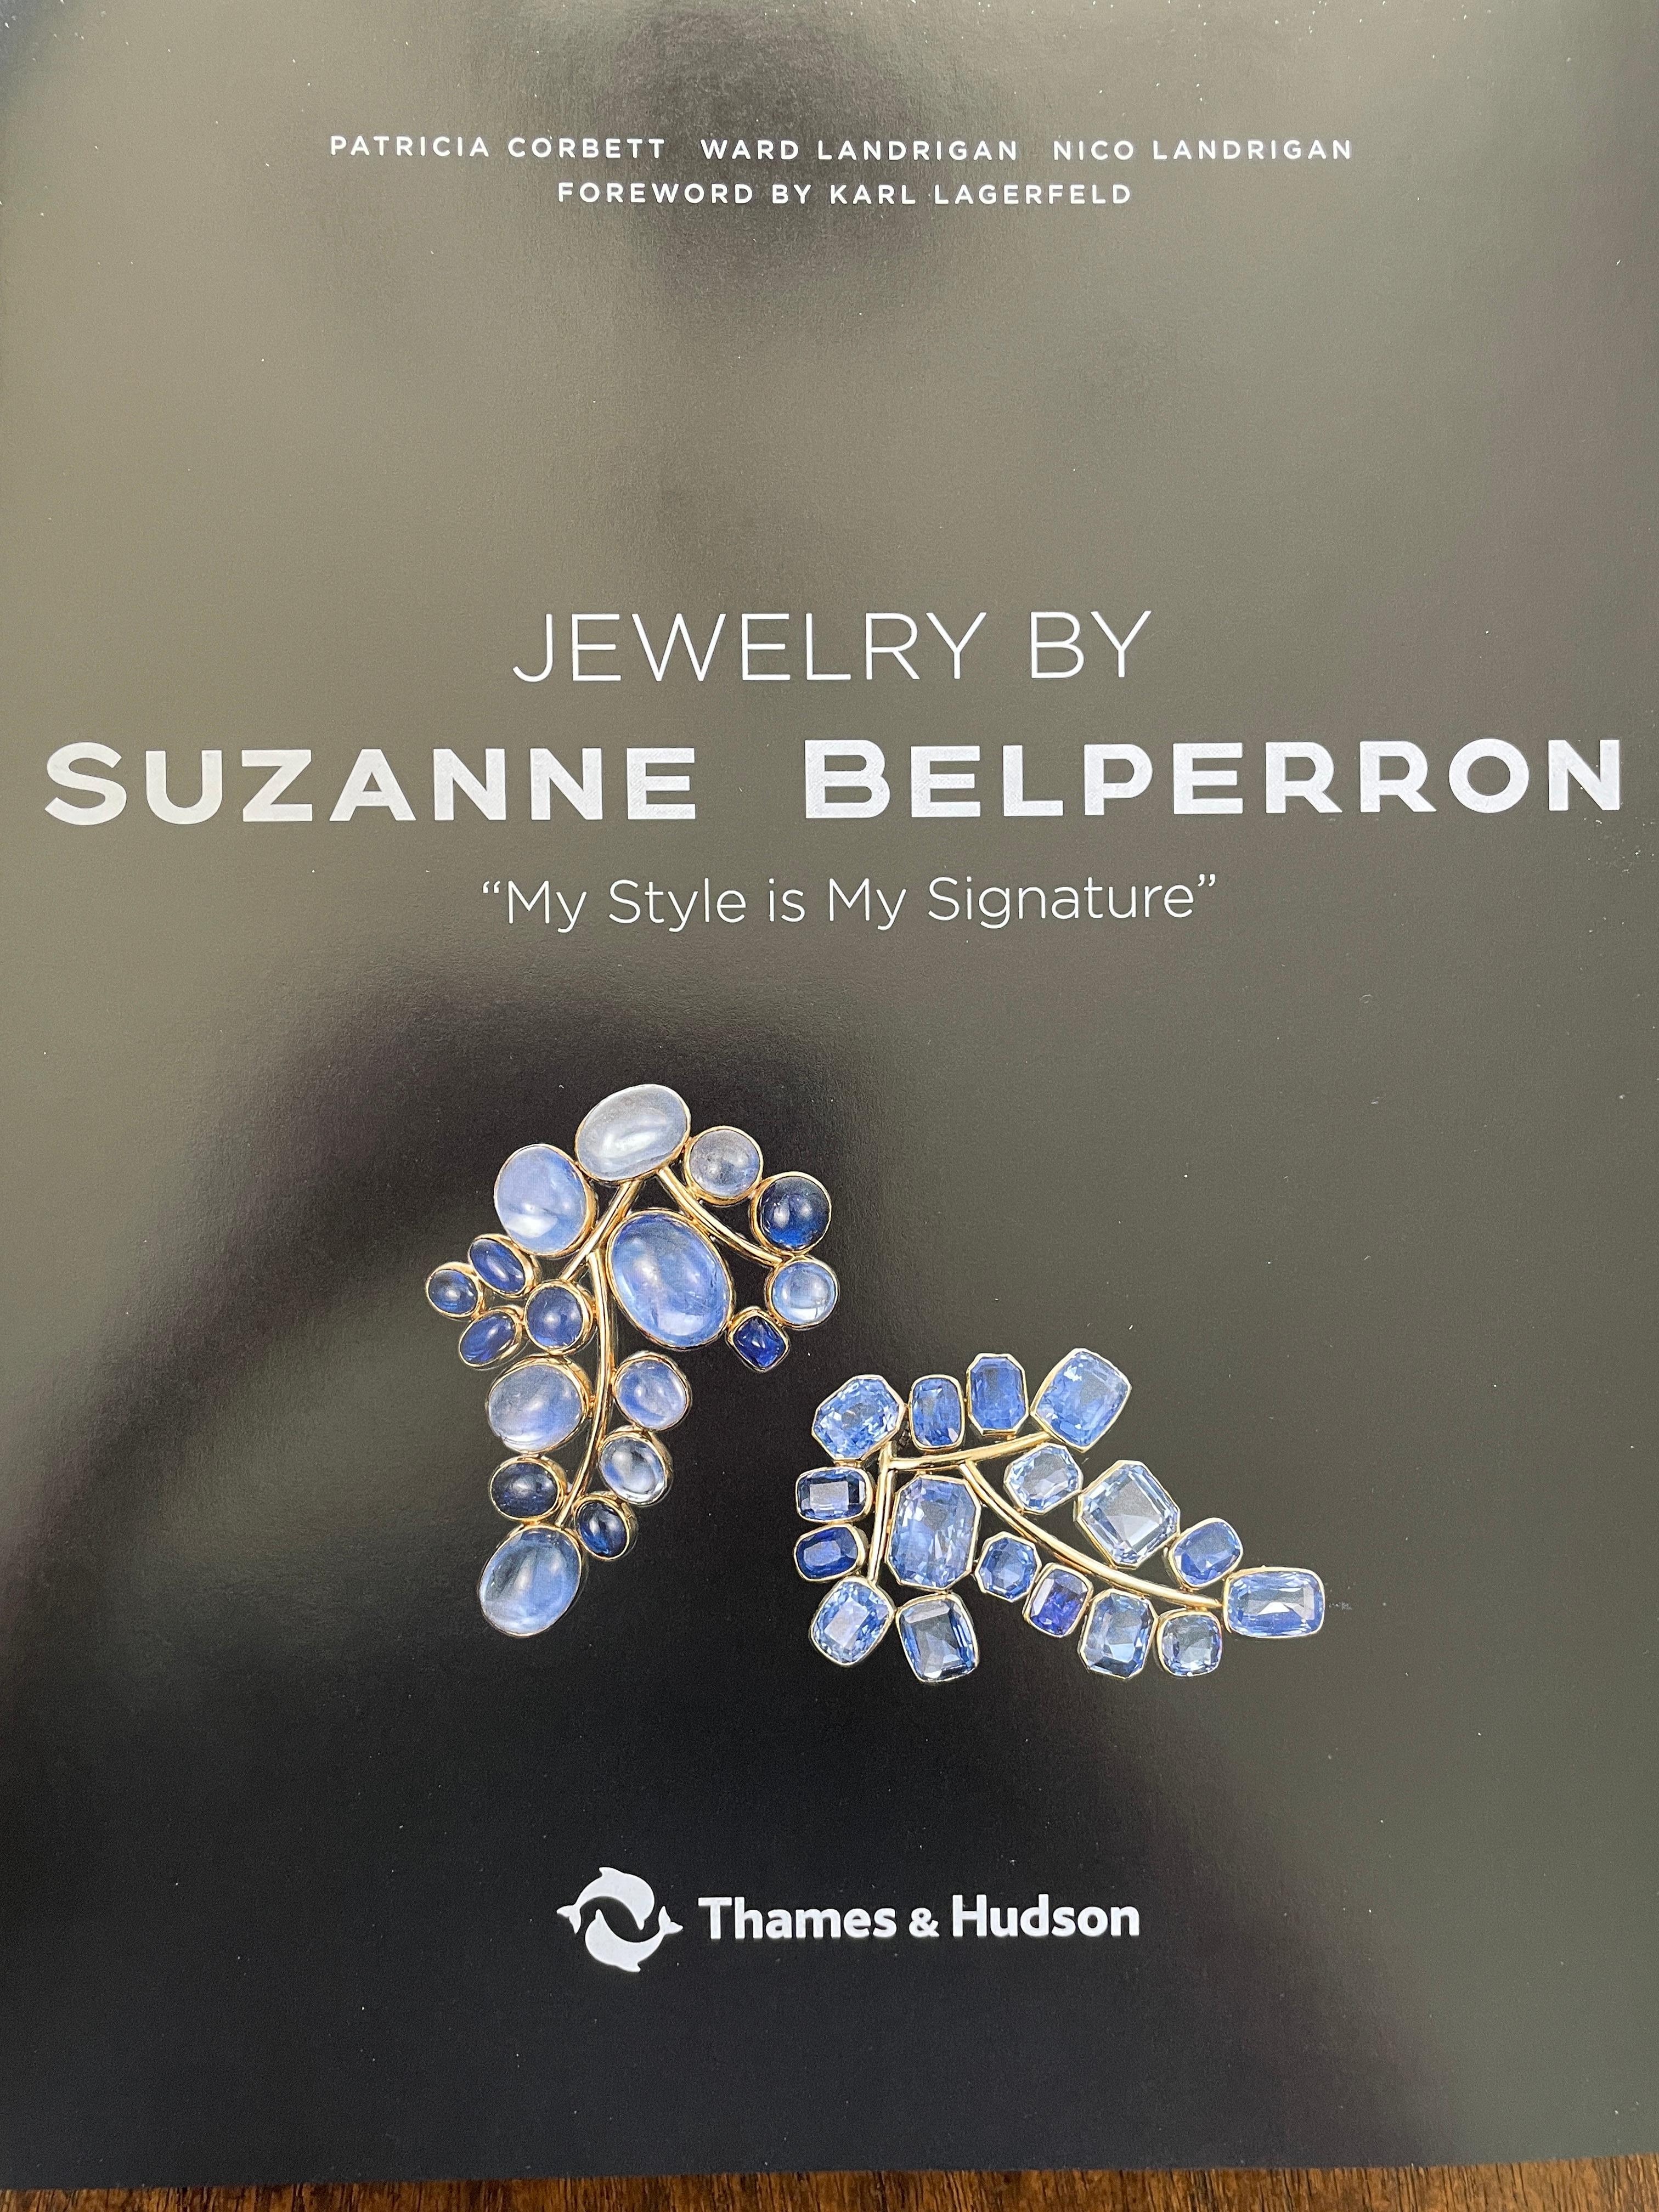 Jewelry by Suzanne Belperron: My Style is My Signature.
Opened and looked at once, in excellent as new condition.
240 pages 
Published by Thames and Hudson.
10.6 x 1.2 x 11.4 inches

